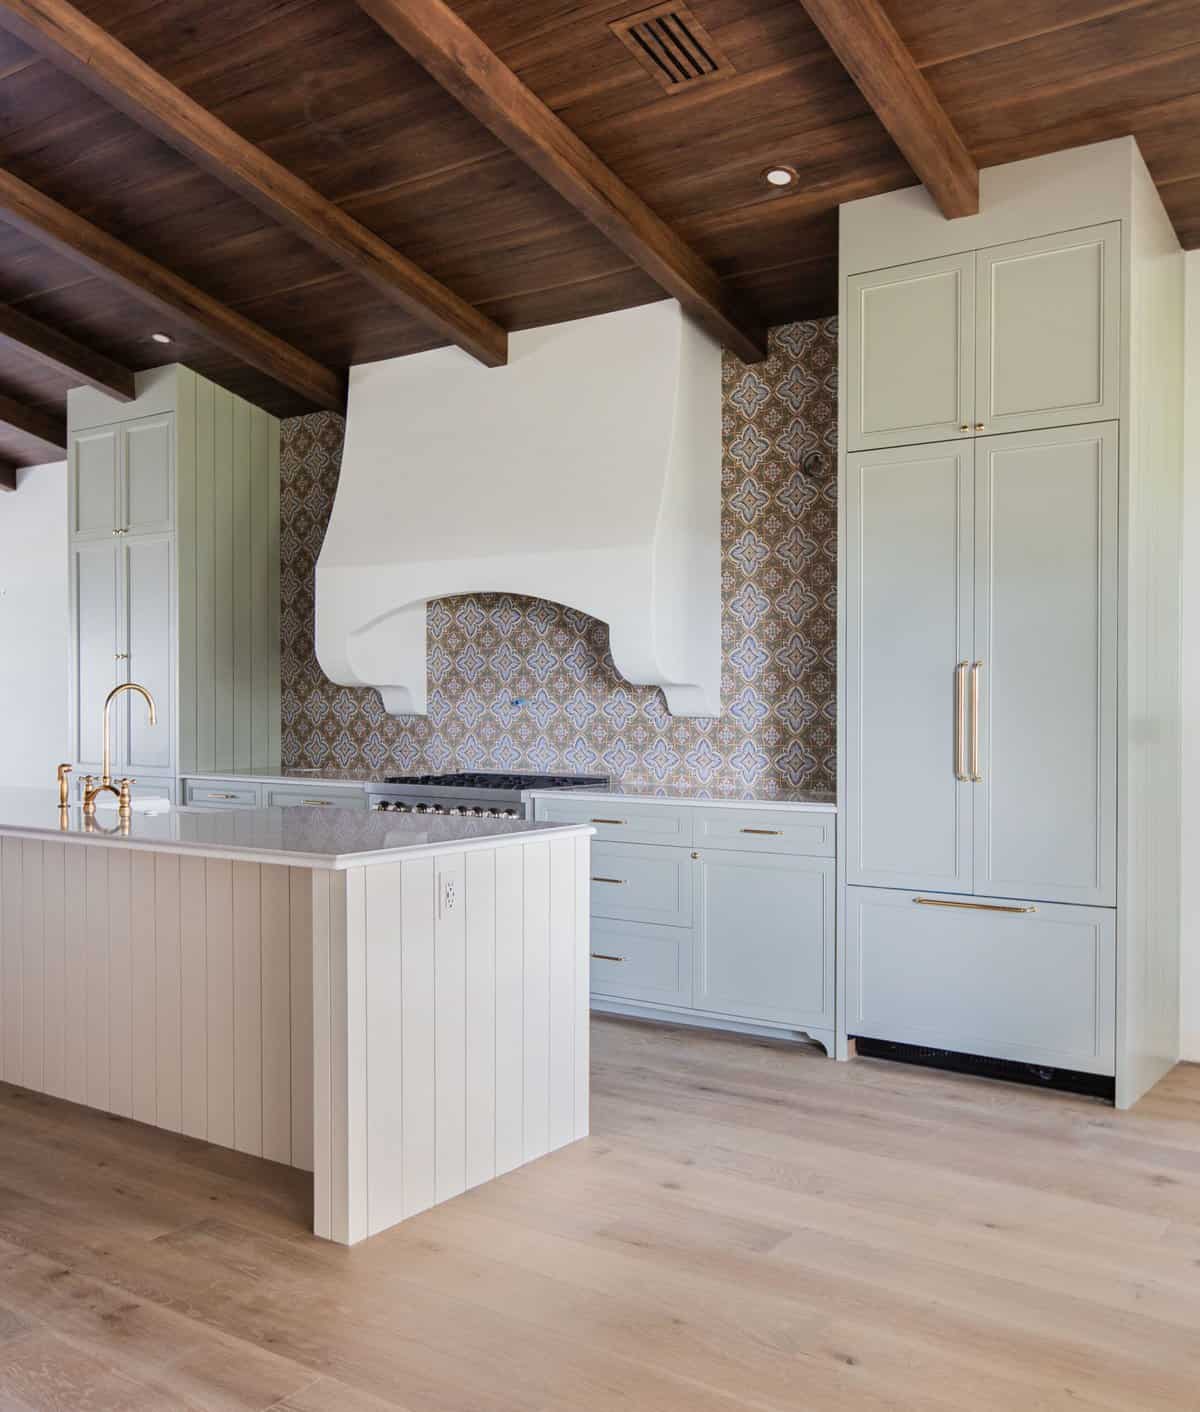 spanish style kitchen with sage green cabinets and patterned tile